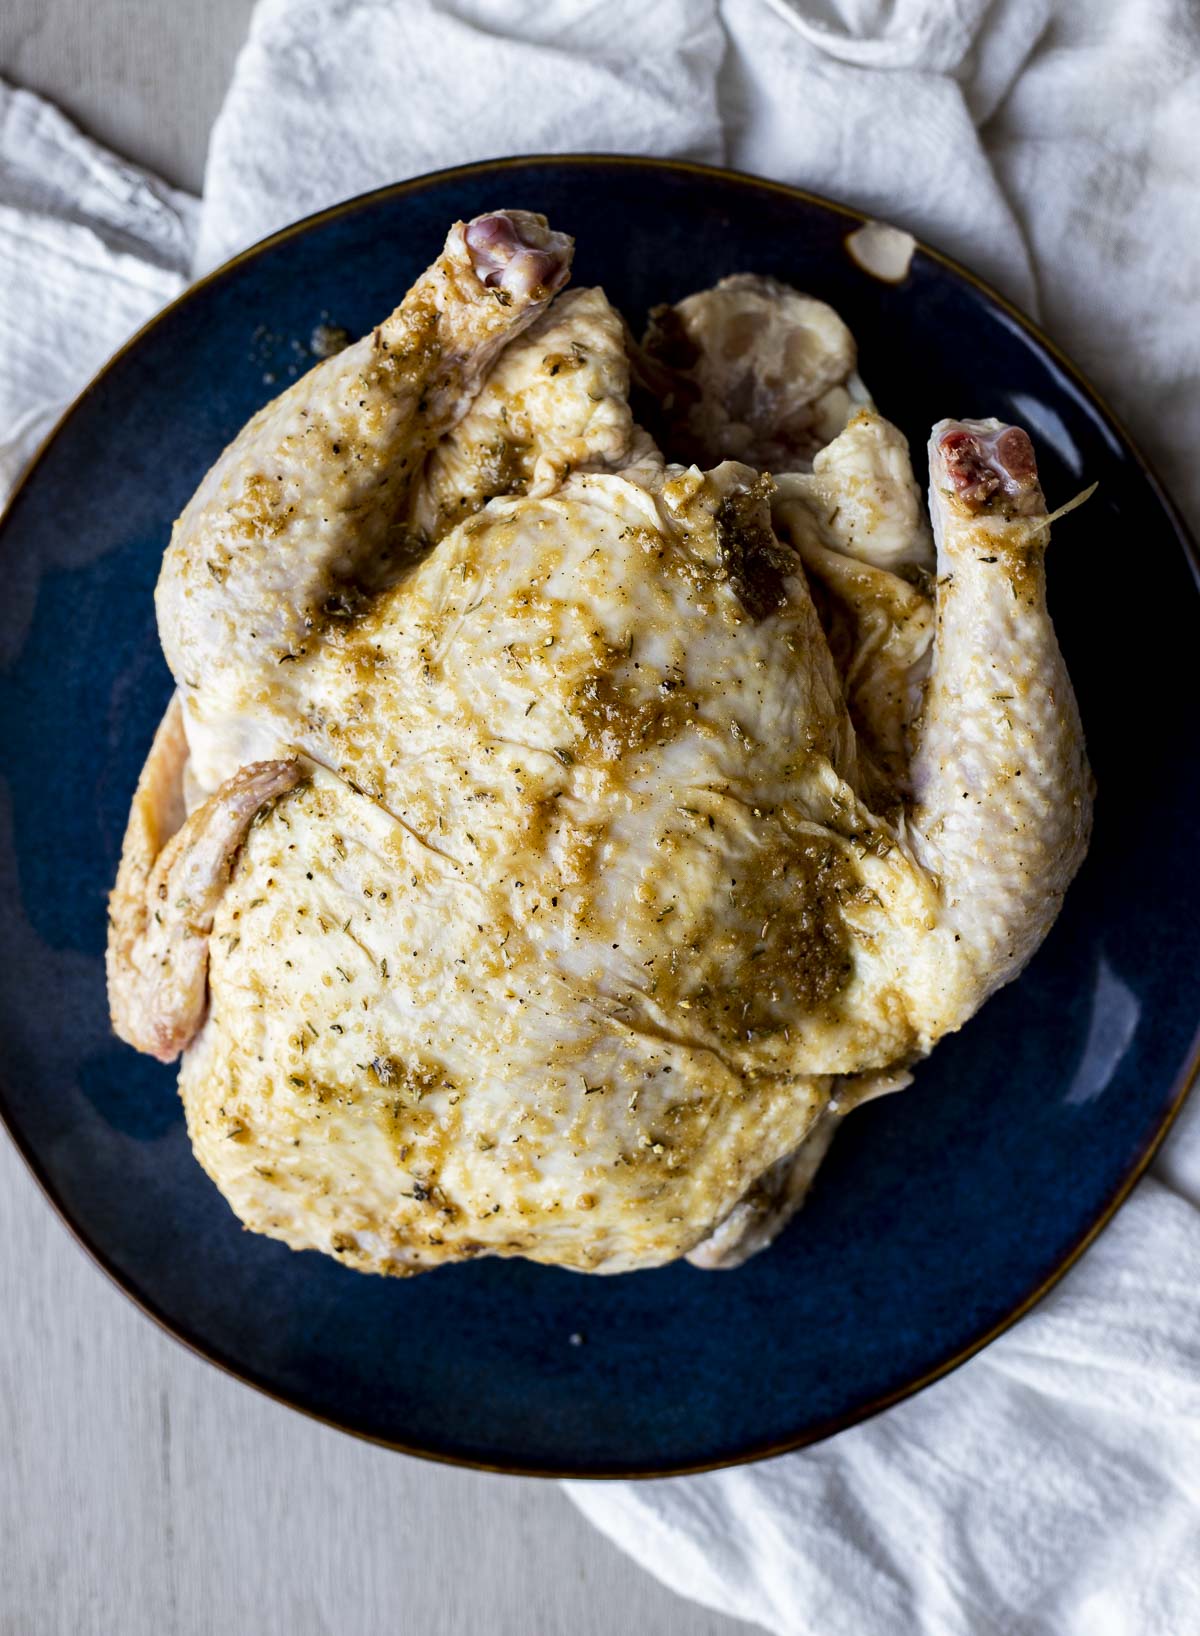 Overhead view of a seasoned whole chicken on a plate.